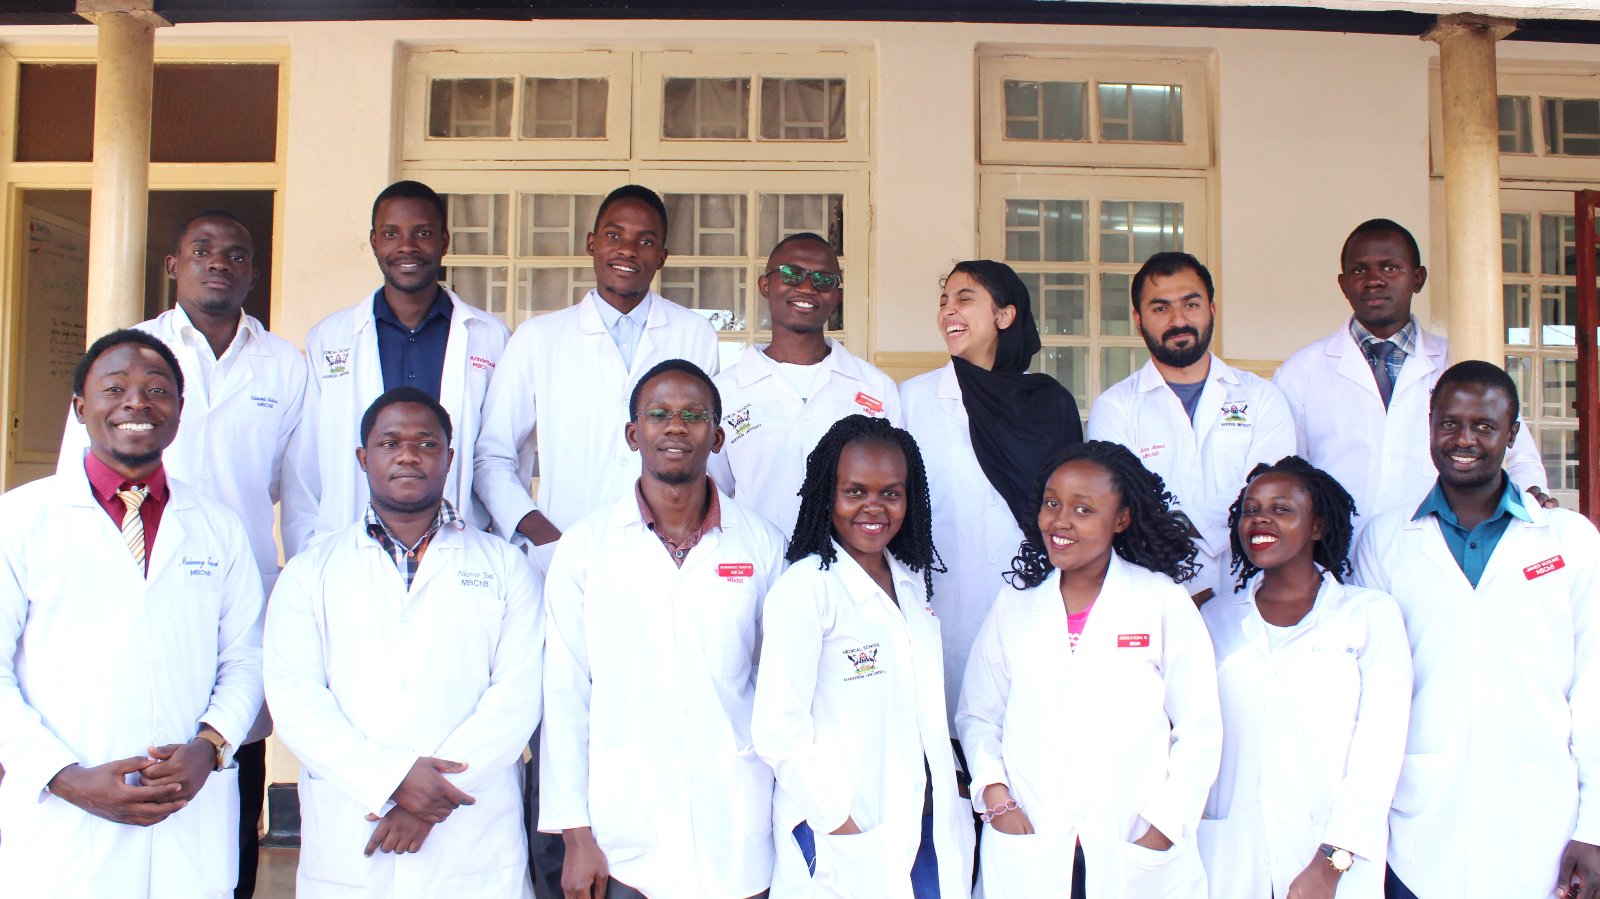 Members of the Makerere University College of Health Sciences Students Association (MAKCHSA) pose for a photo ahead of their 1st College Open Day and Alumni Convention held on 1st November 2019.